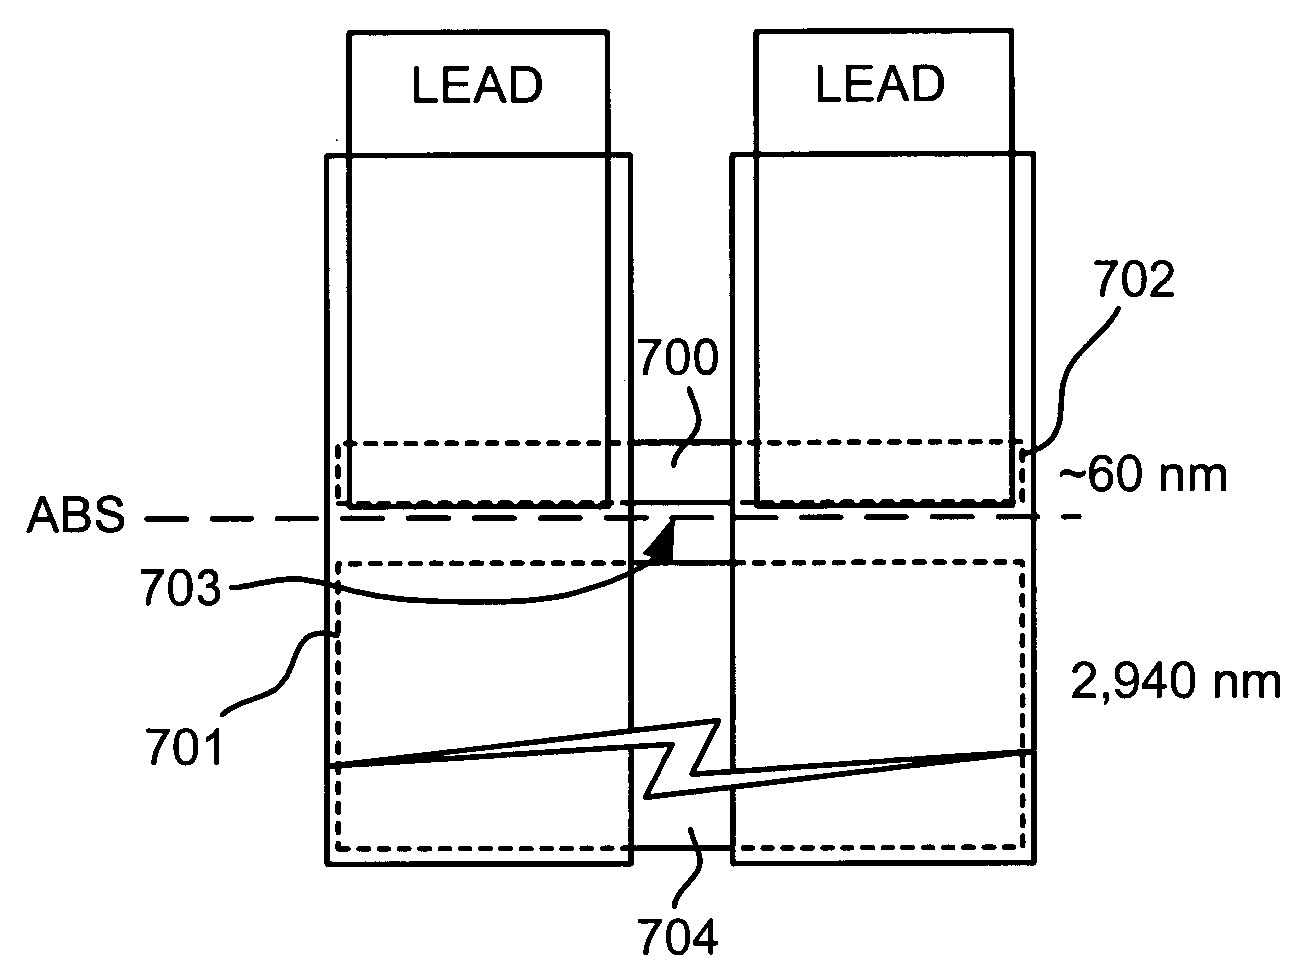 Method of forming an embedded read element